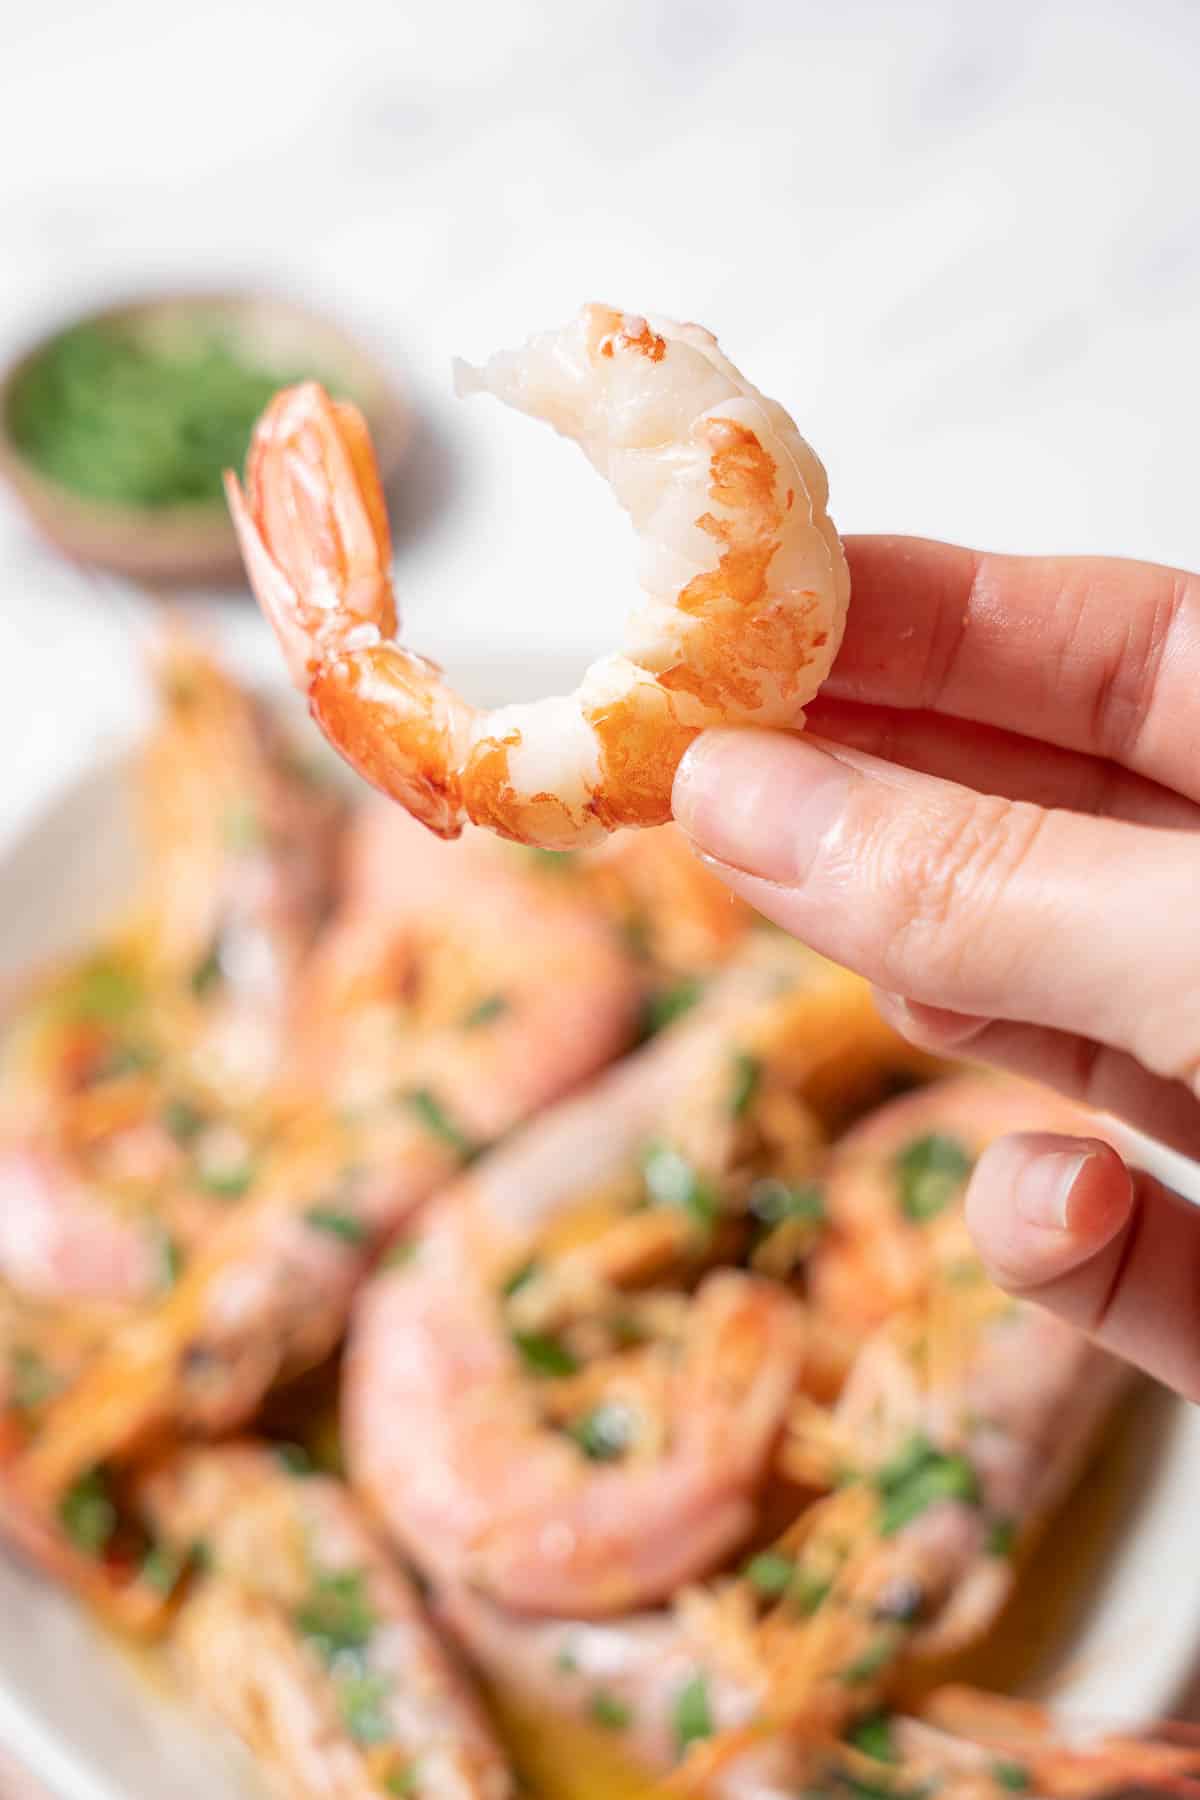 holding a peeled shrimp in whiskey sauce.